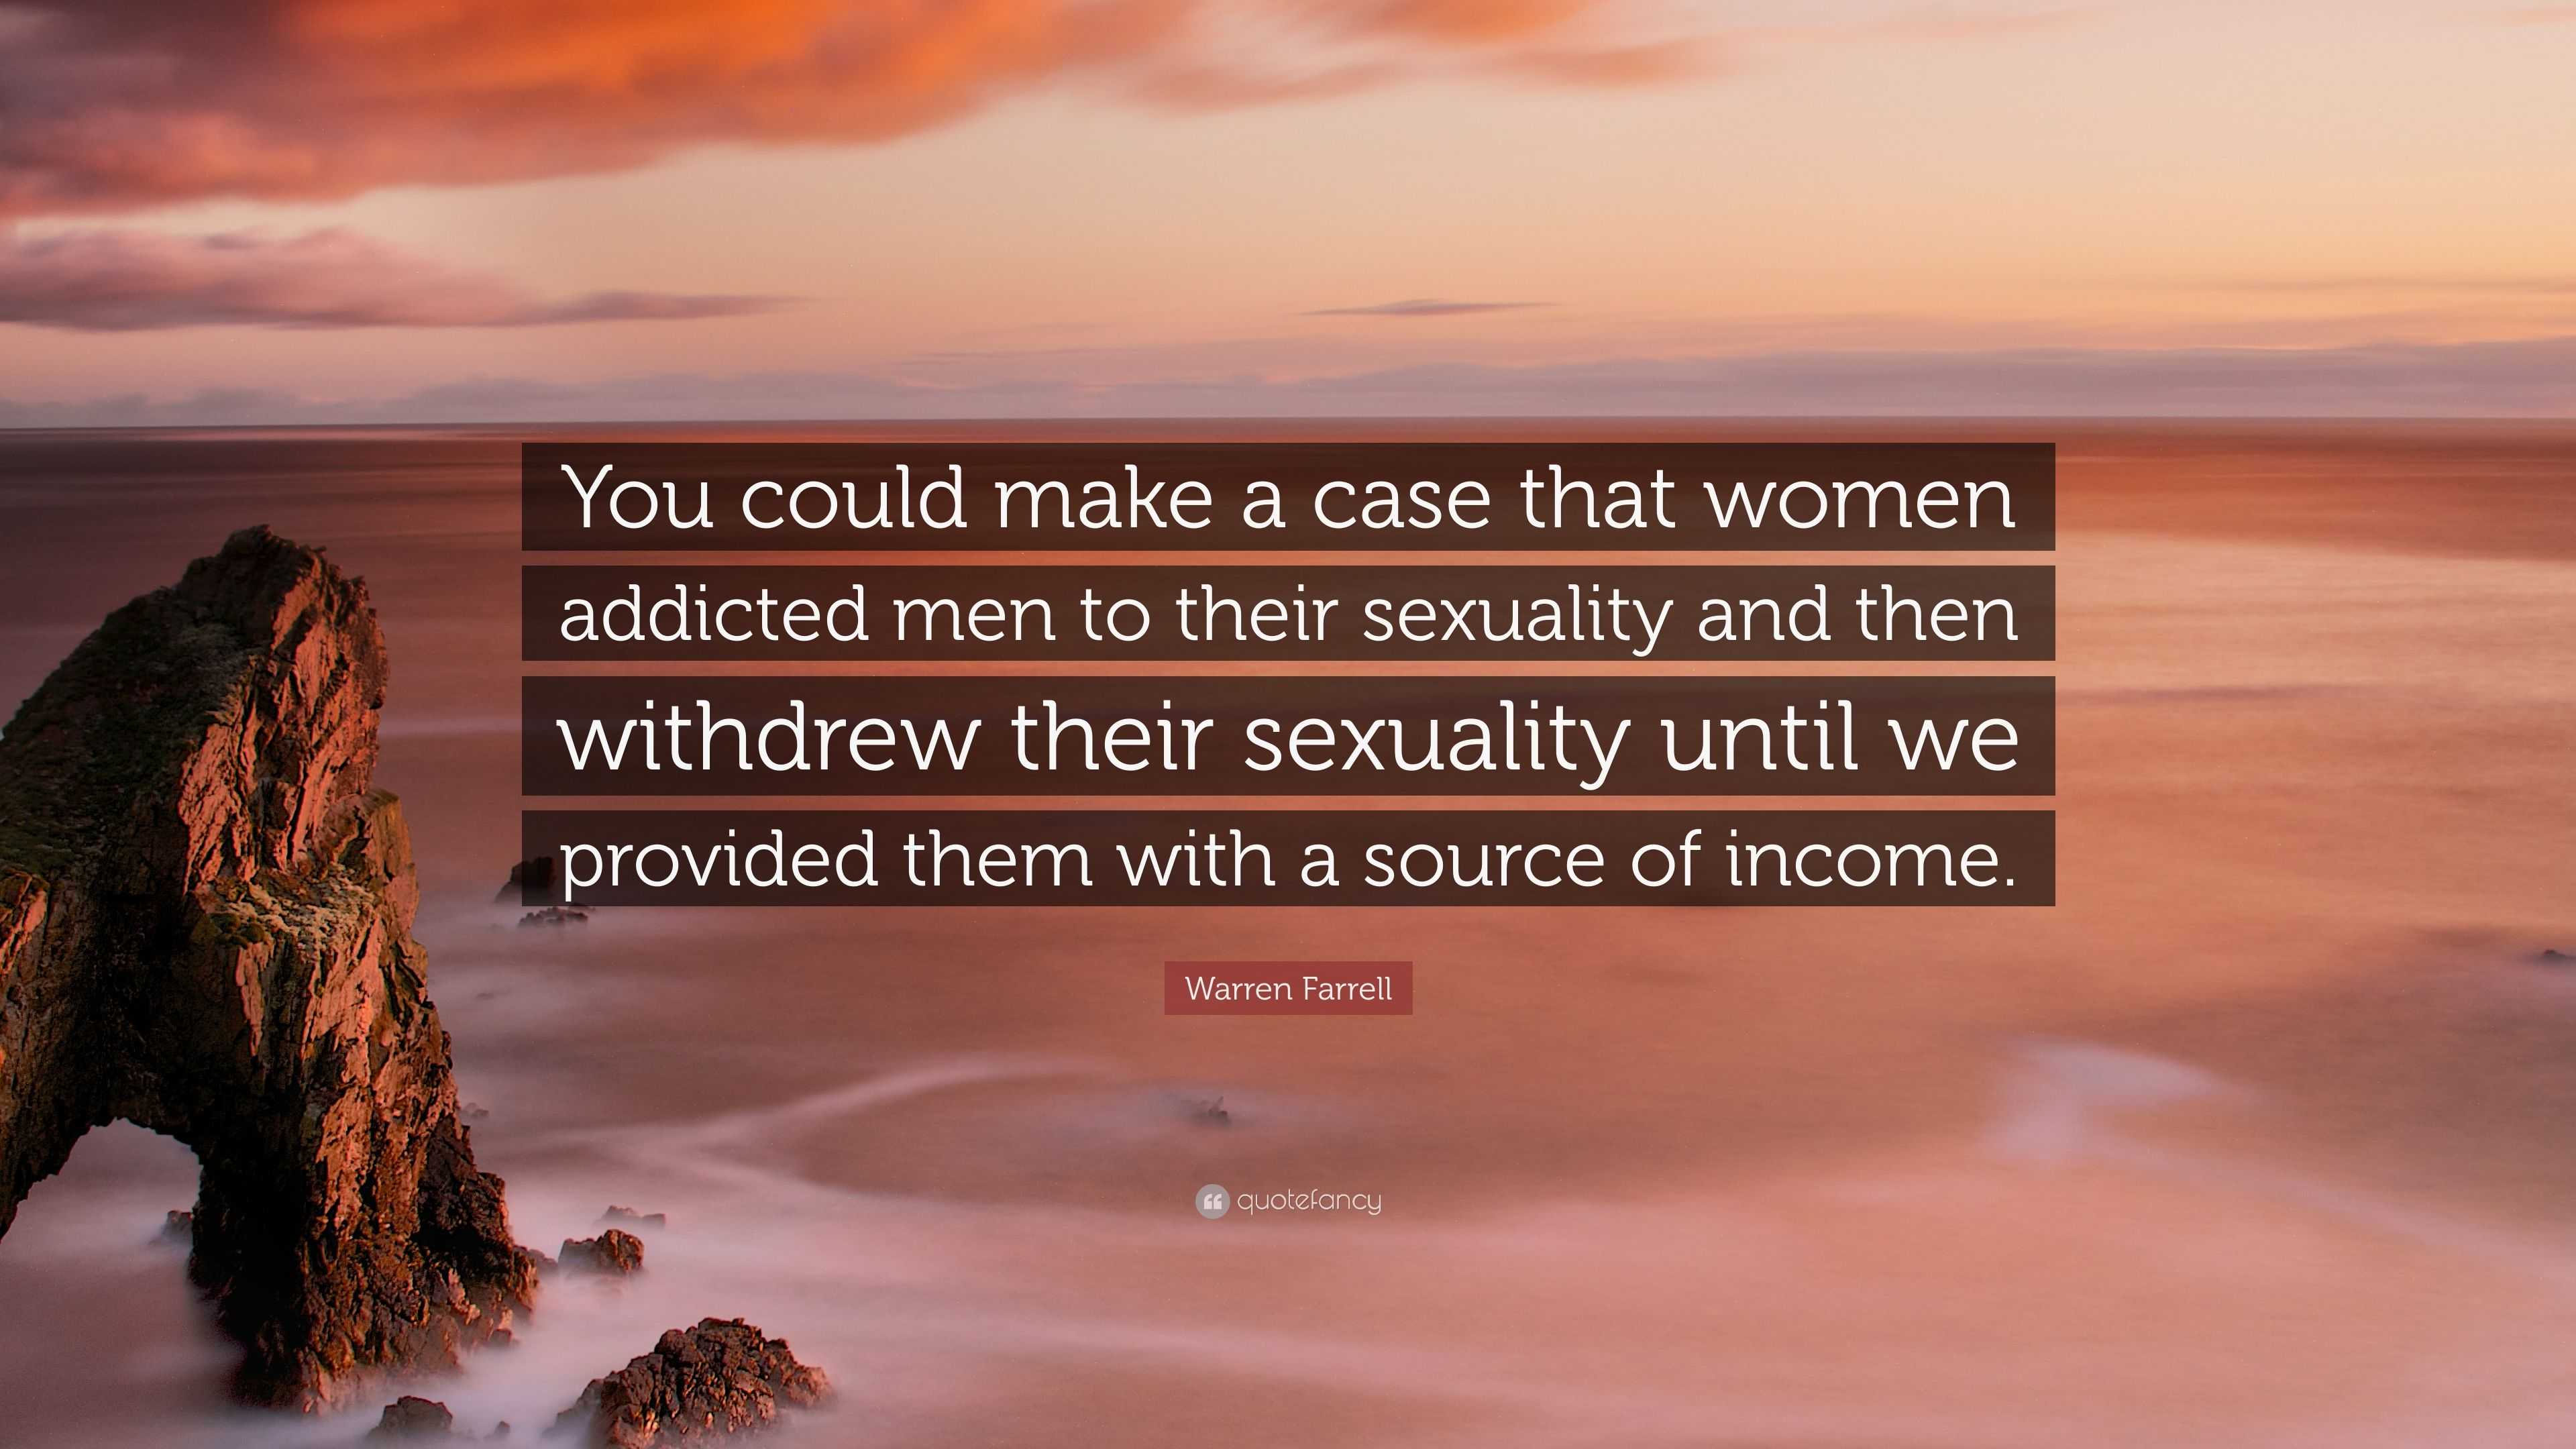 Warren Farrell Quote “You could make a case that women addicted men to their sexuality and then withdrew their sexuality until we provided the...”